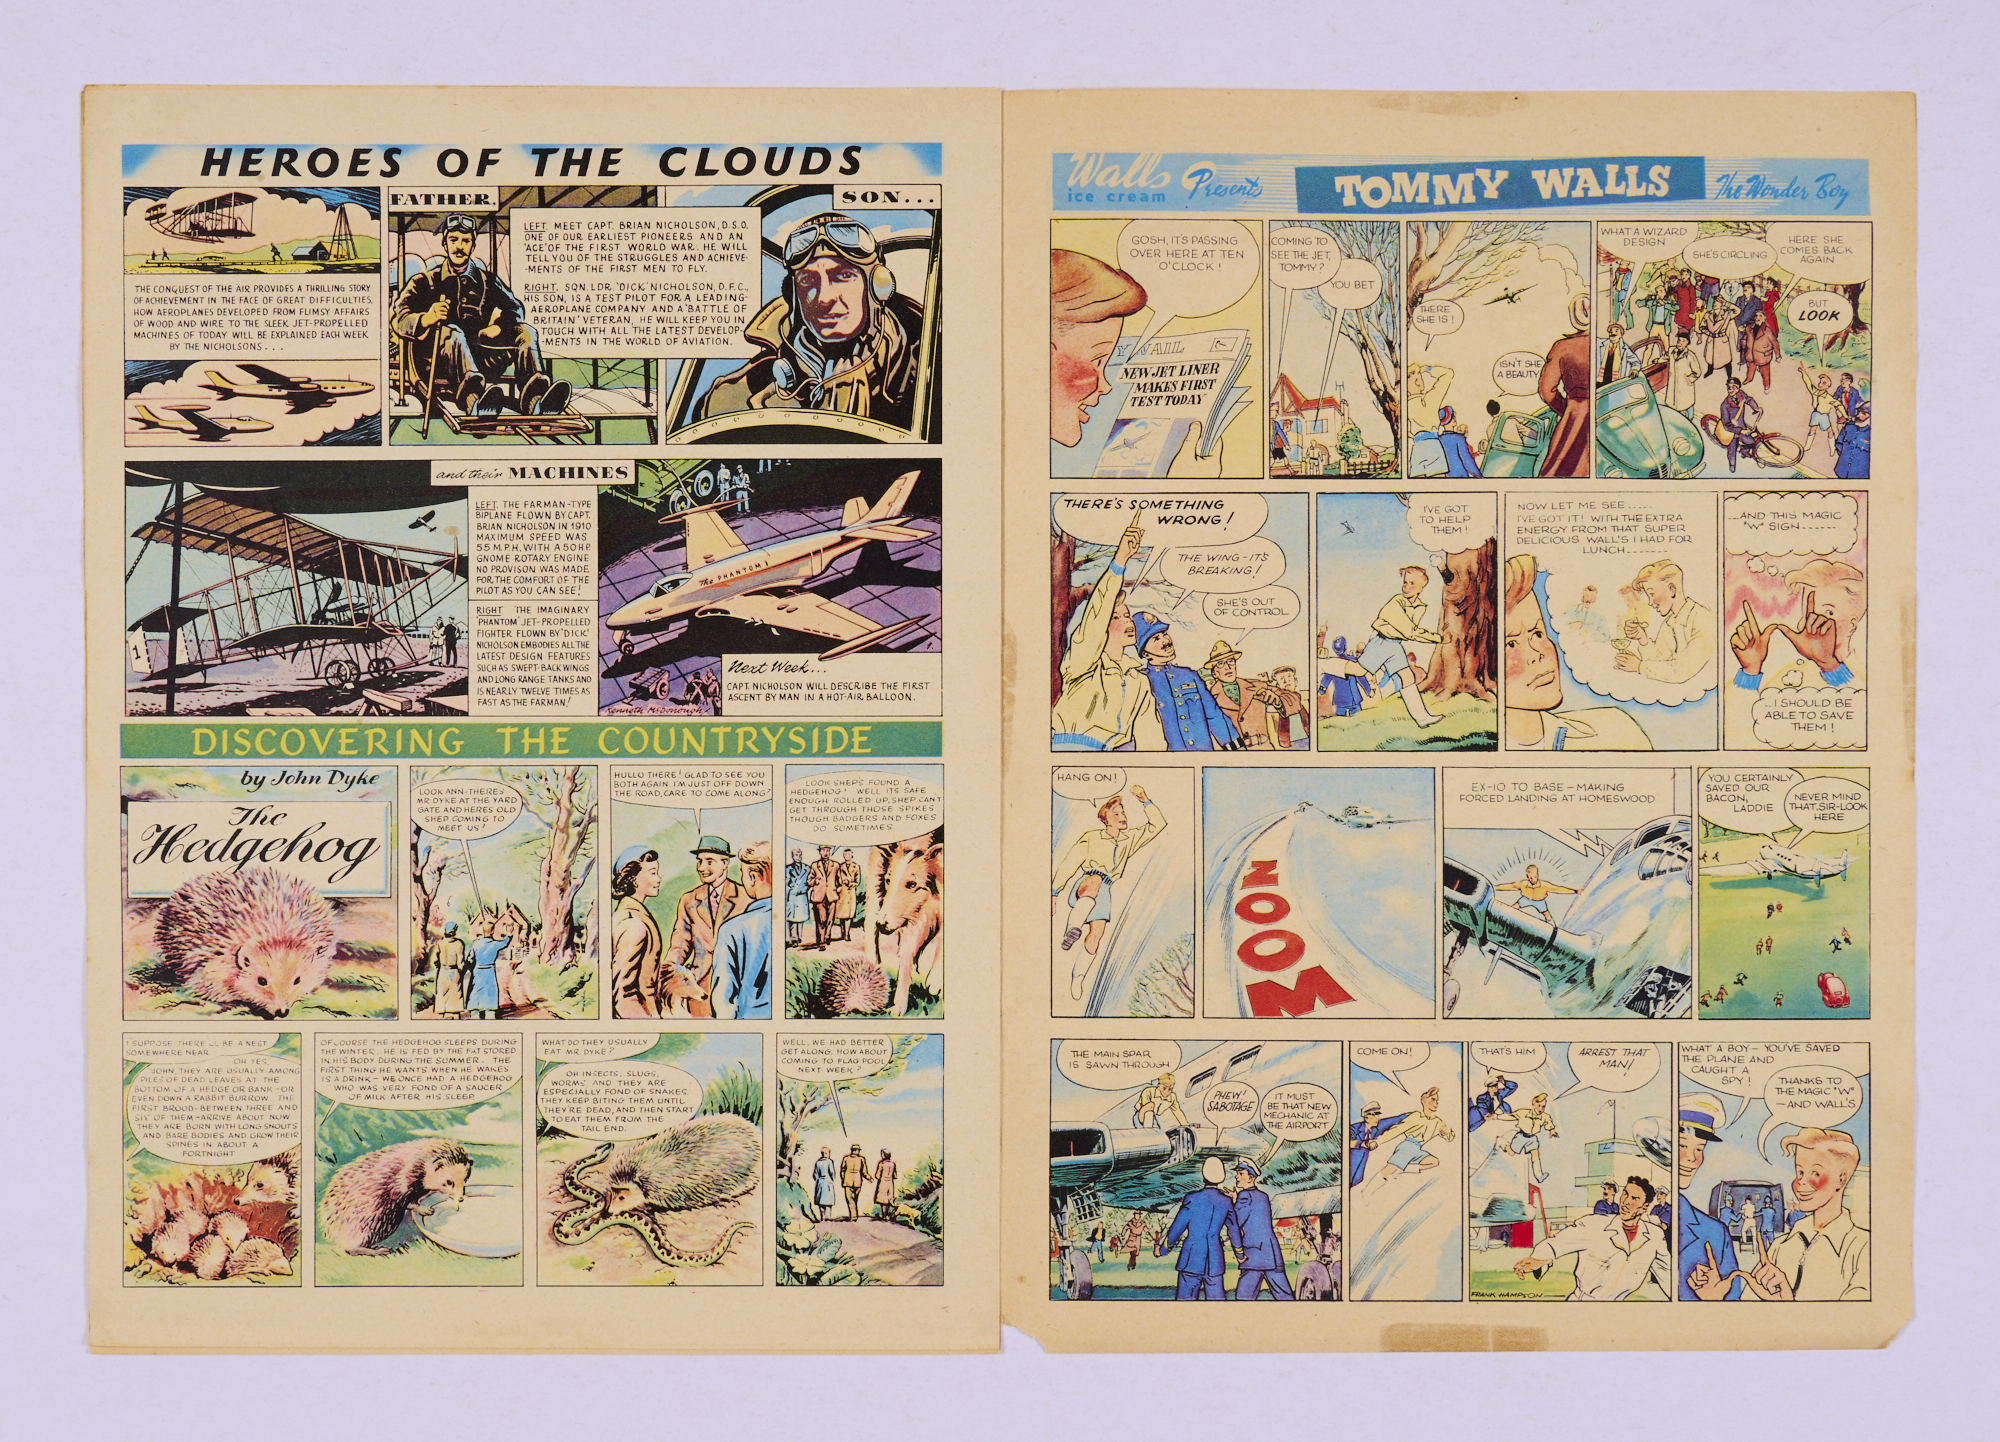 Eagle No 1 promo (1950). Promotional 8 pg full colour issue distributed to churches and schools in - Image 4 of 5